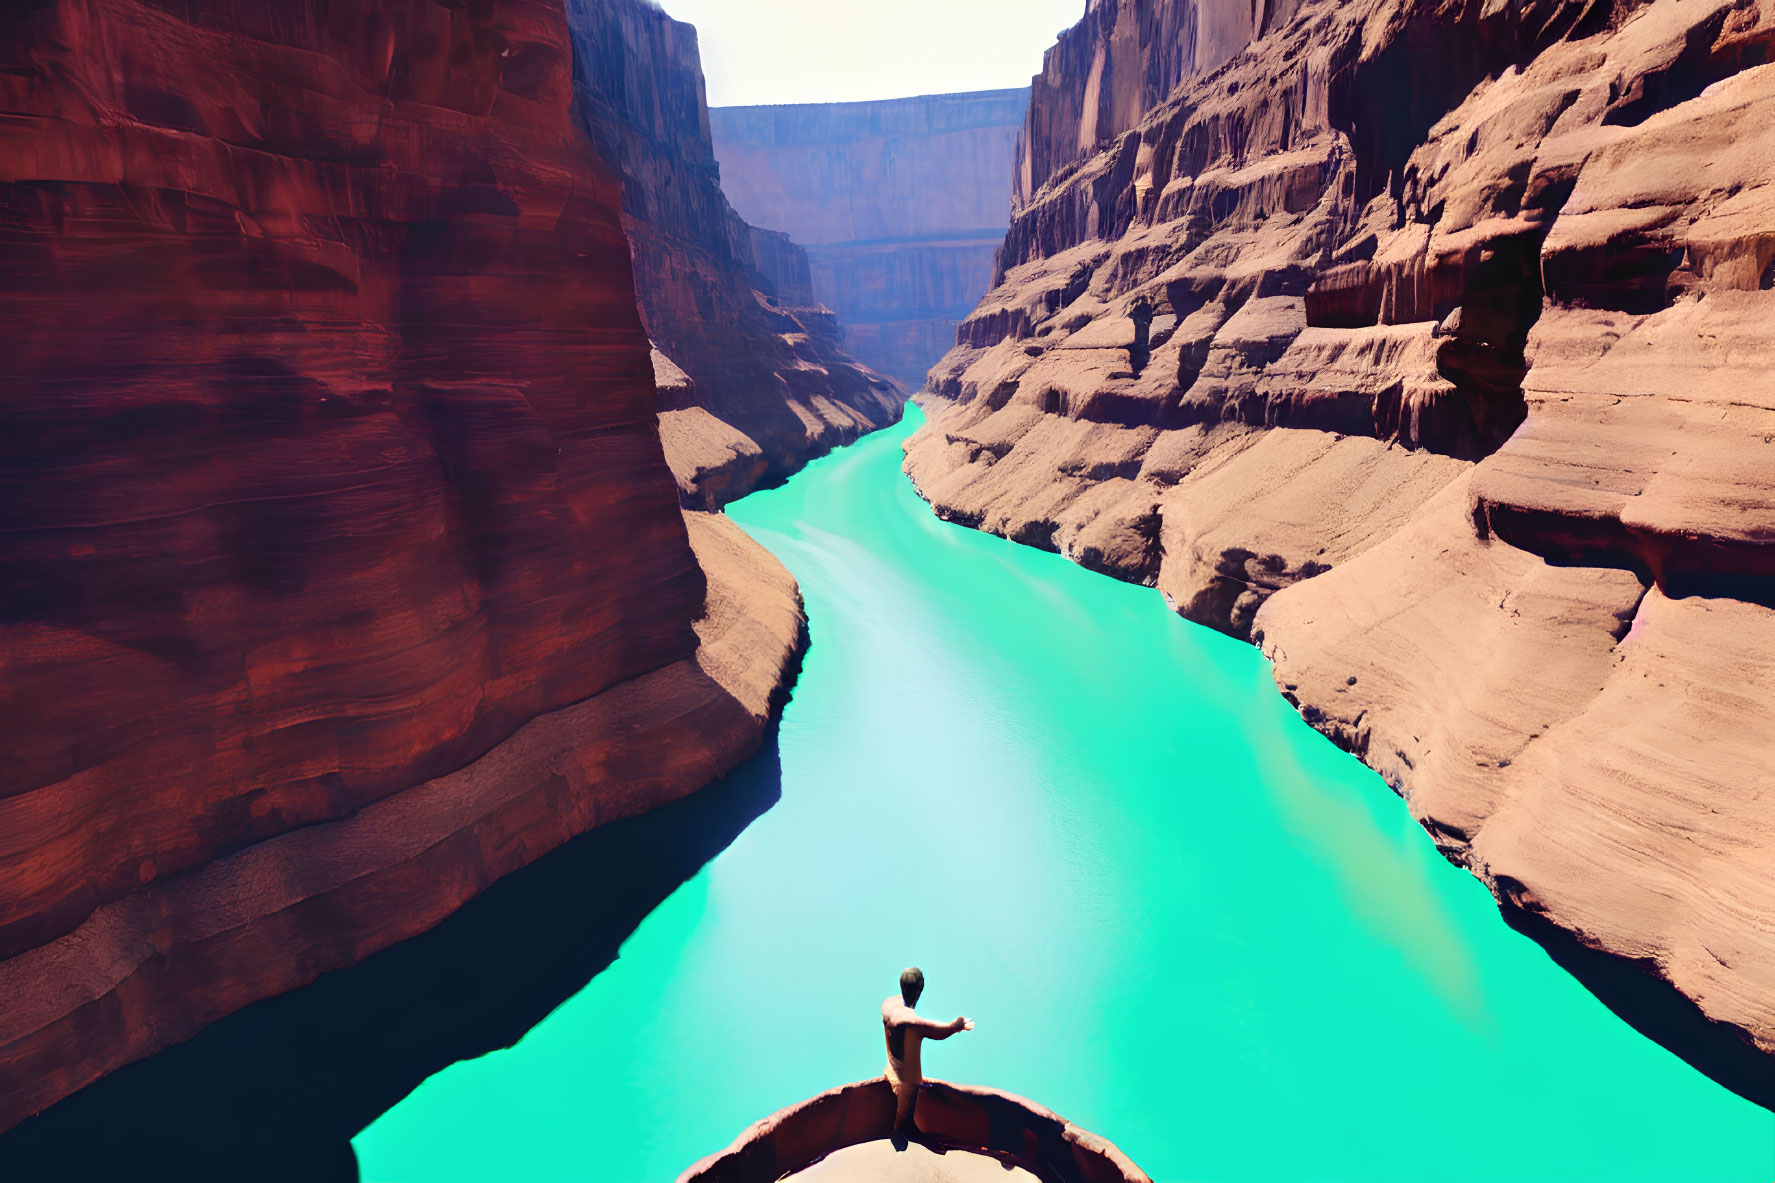 Person practicing yoga on circular platform above turquoise river in red canyon under blue sky